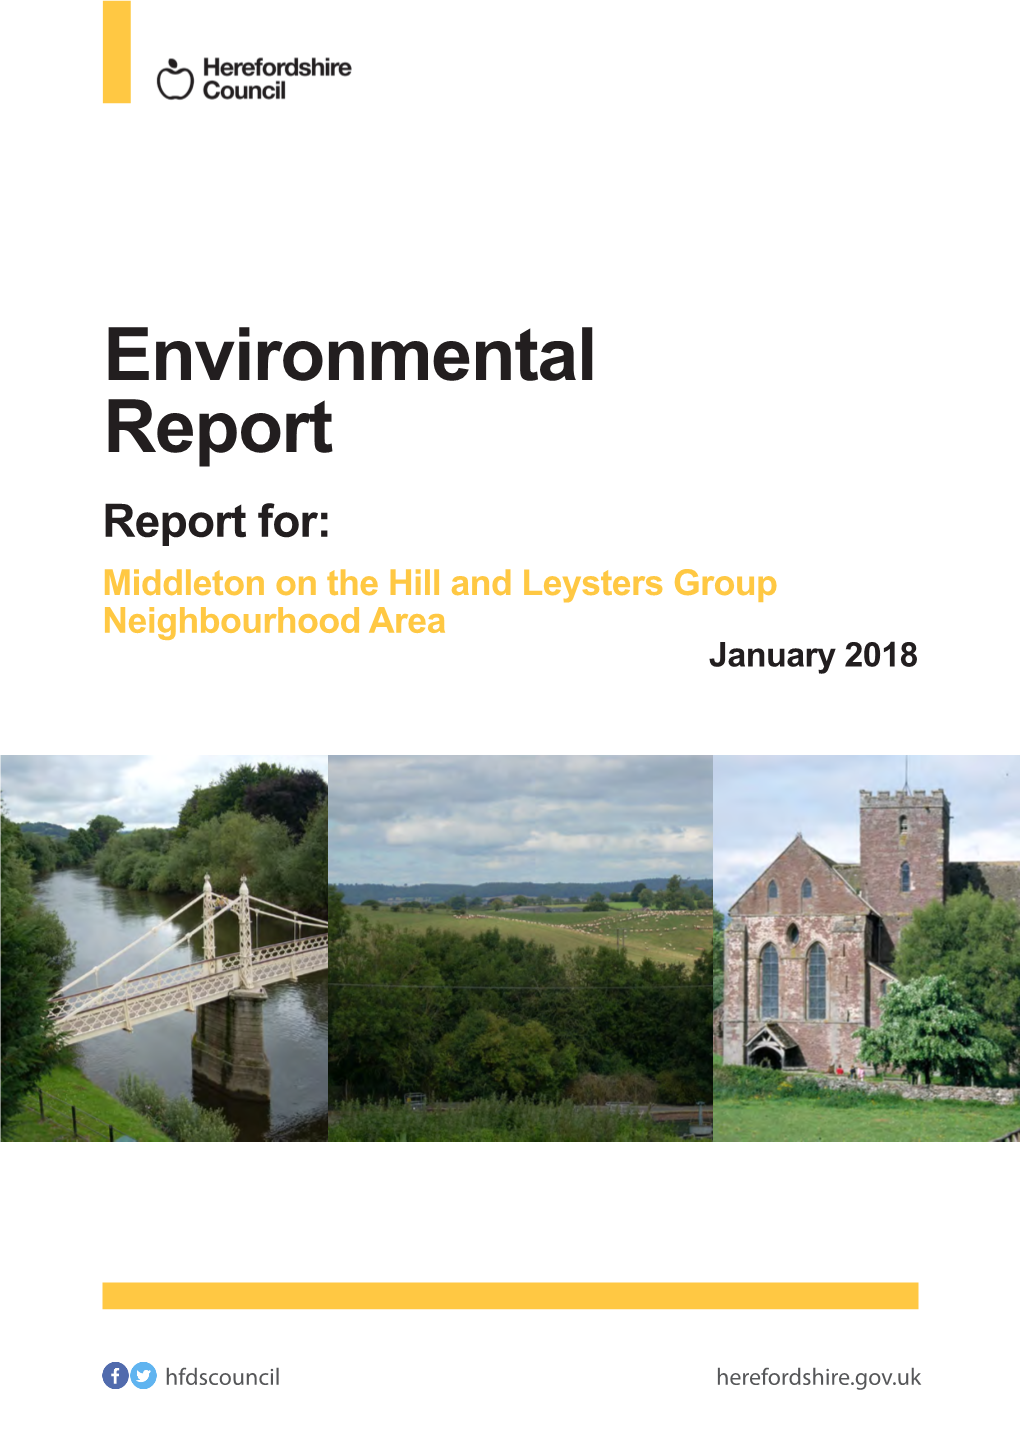 Middleton on the Hill and Leysters Environmental Report